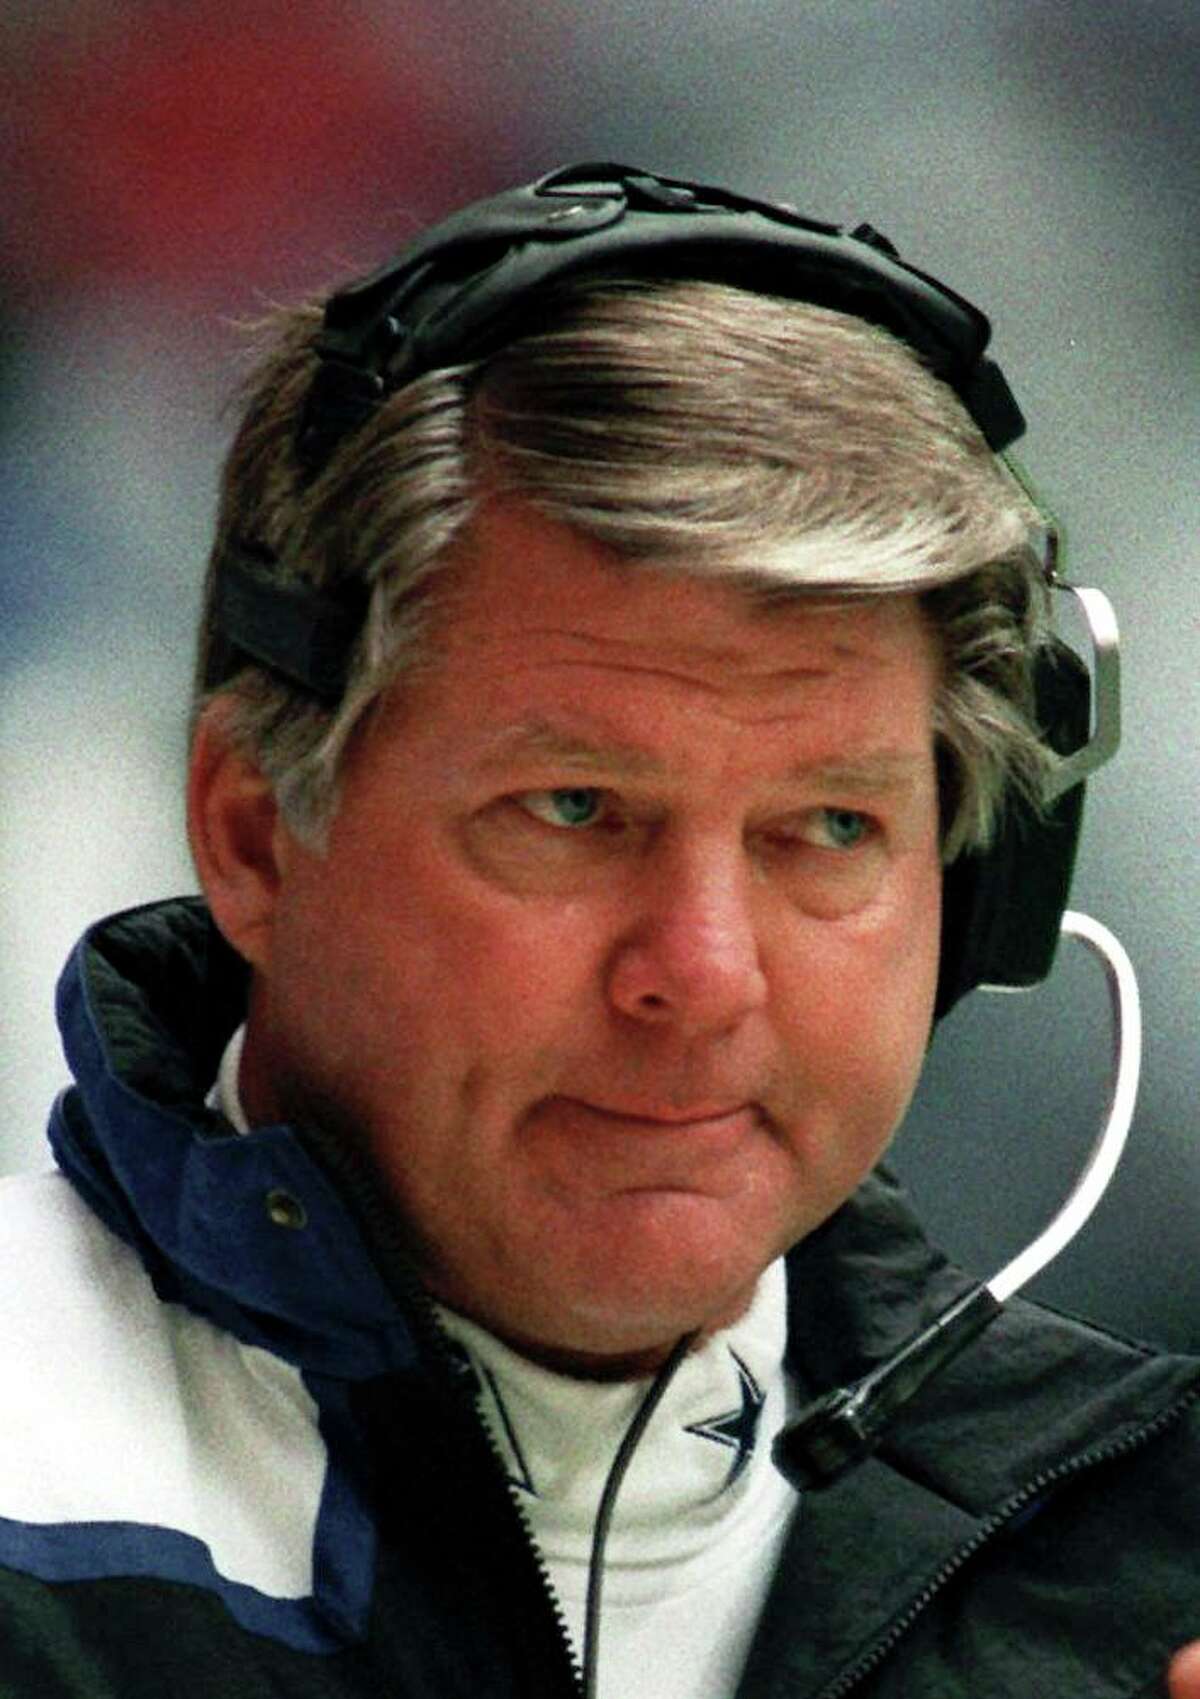 Super Bowlwinning coach Jimmy Johnson into Hall of Fame